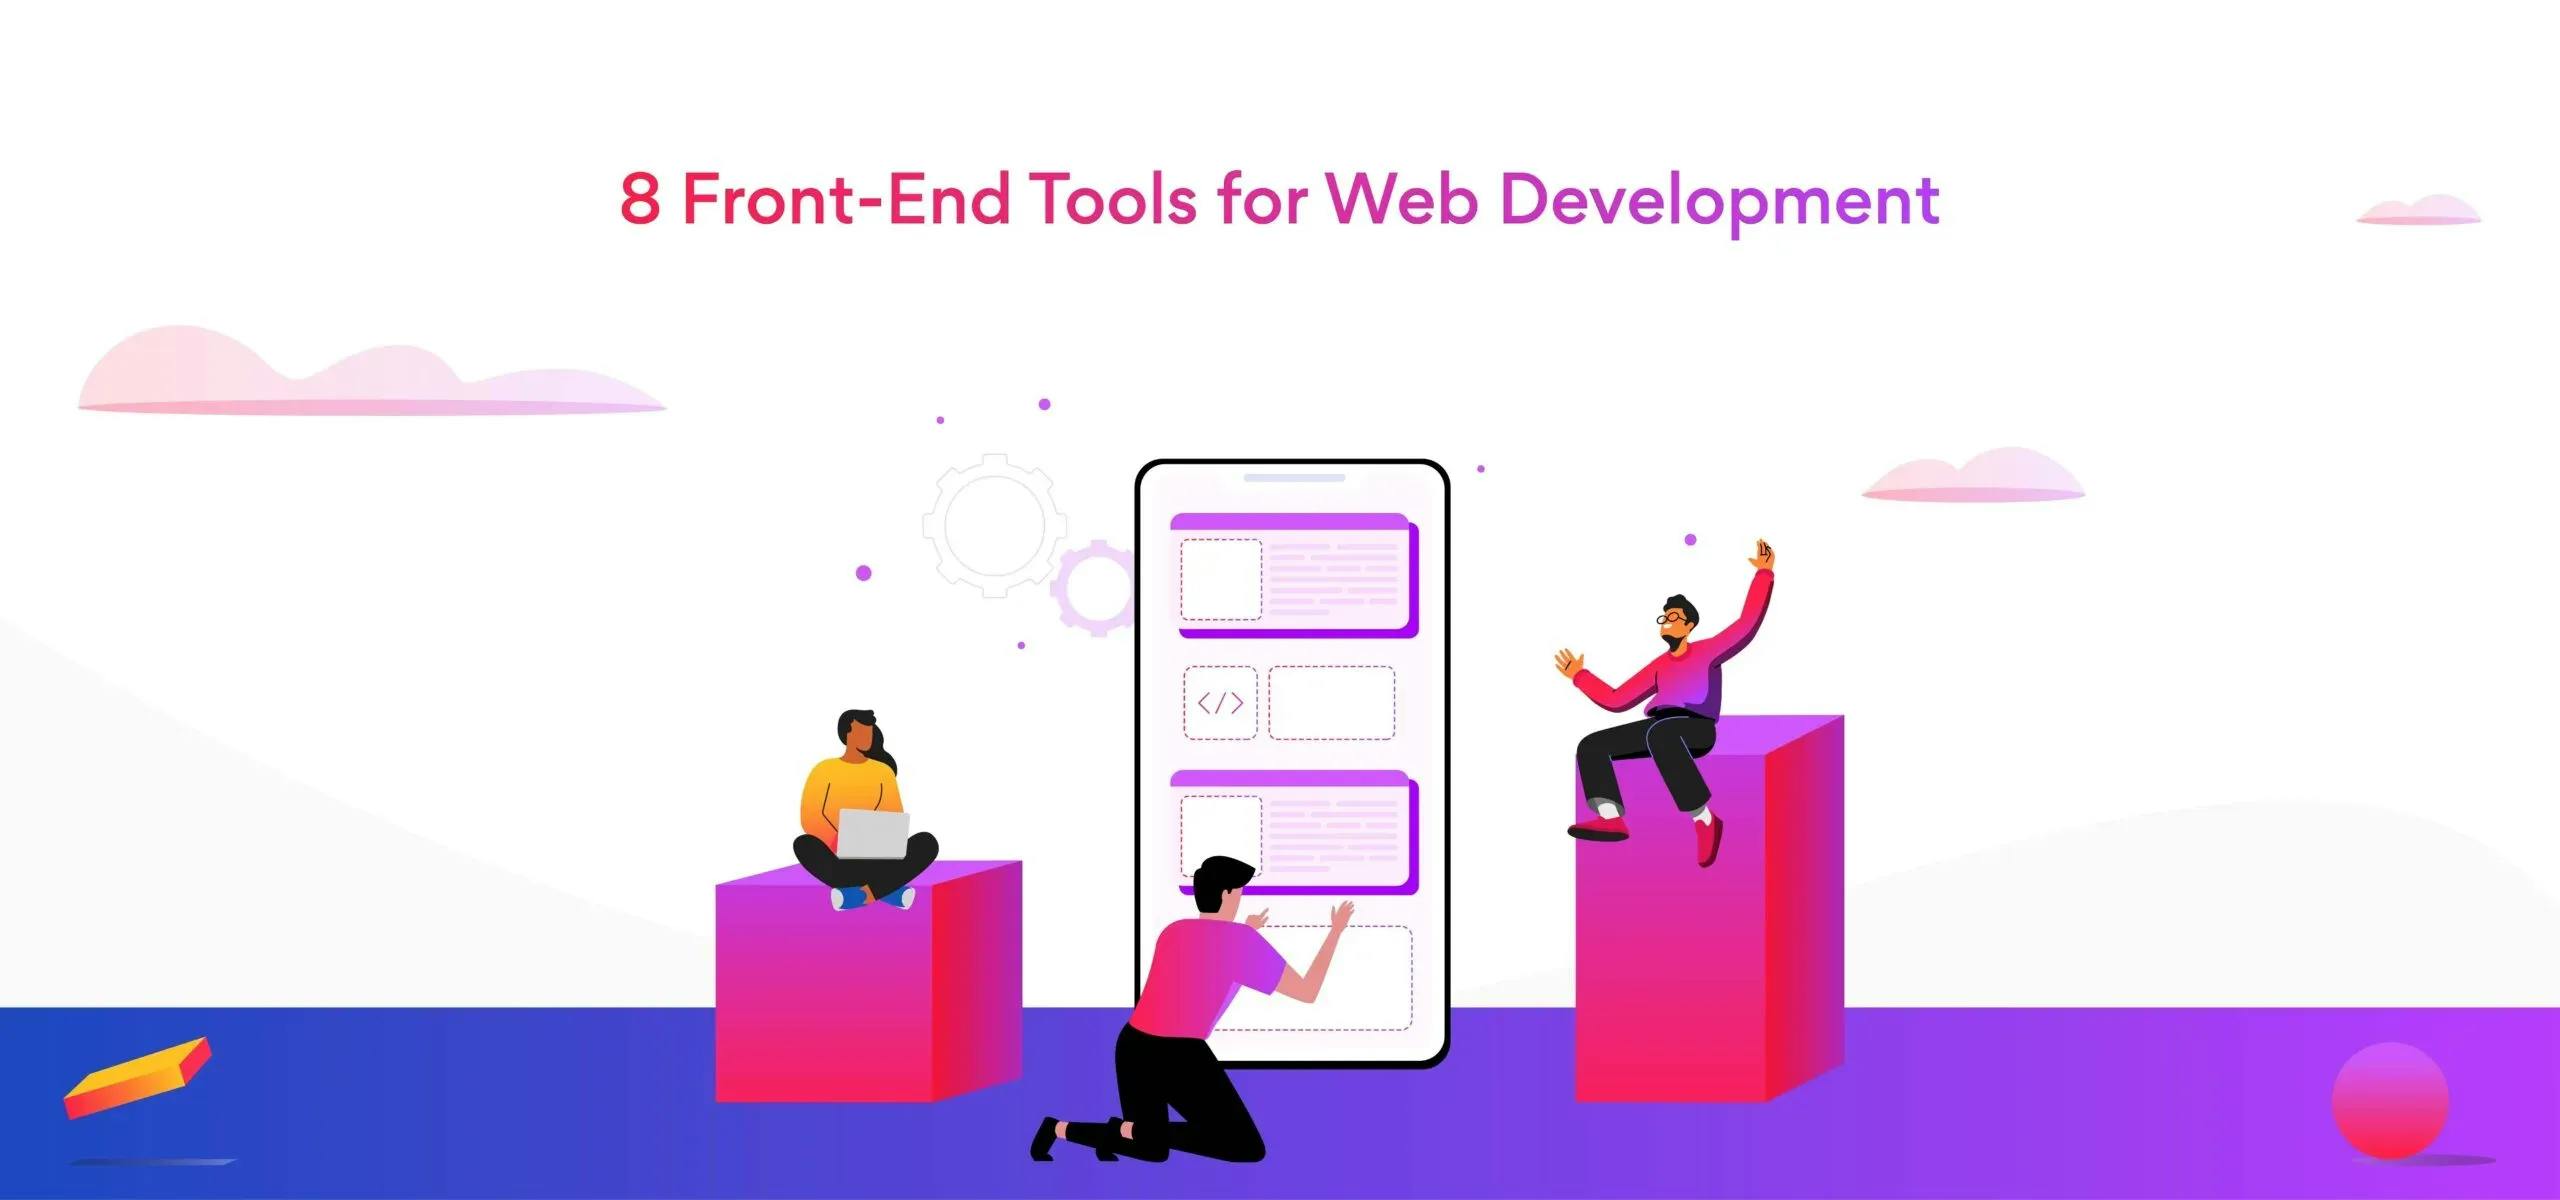 8 Front-End Tools for Web Development